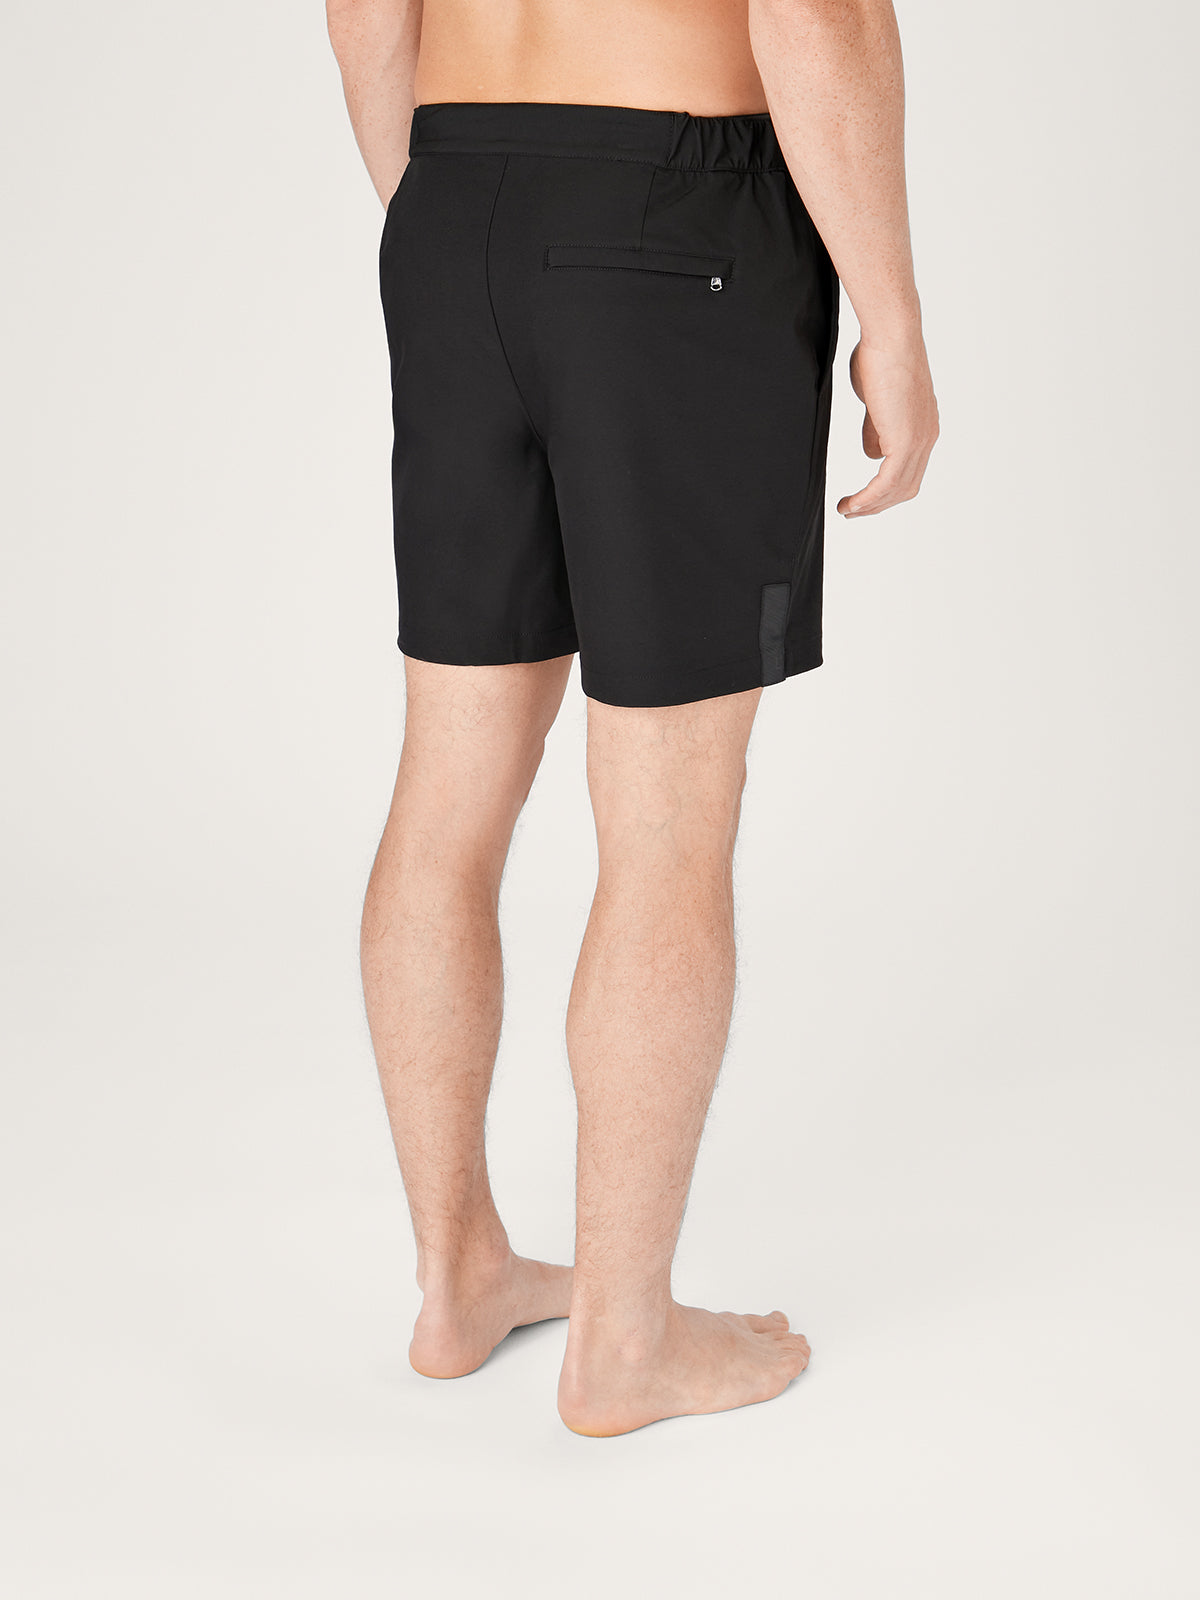 The Anywear Short 2.0 || Black | Recycled nylon without netting